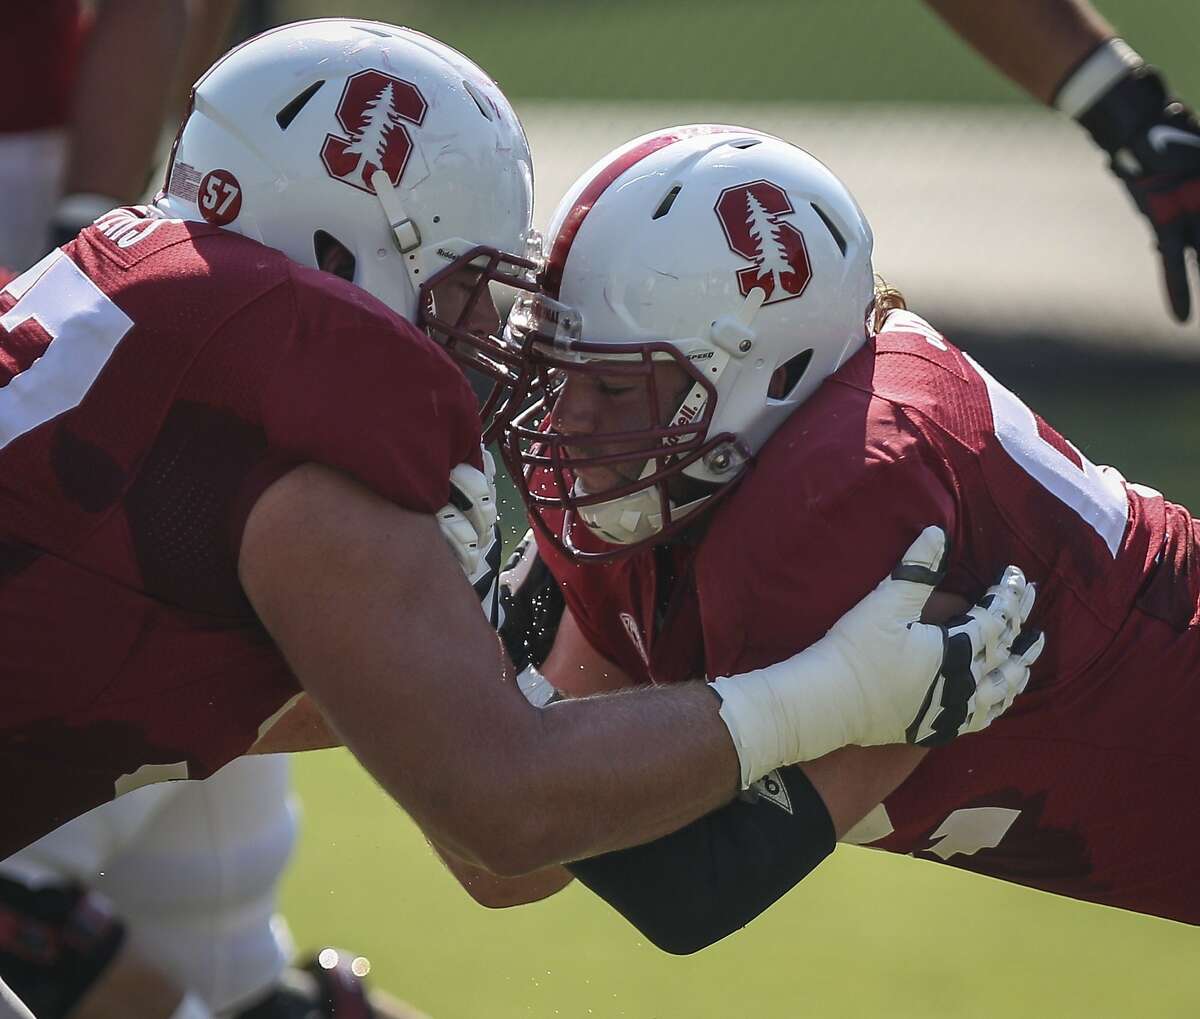 Stanford center Graham Shuler (right) faces off against Johnny Caspers during practice at Stanford University on Saturday, Aug. 15, 2015.